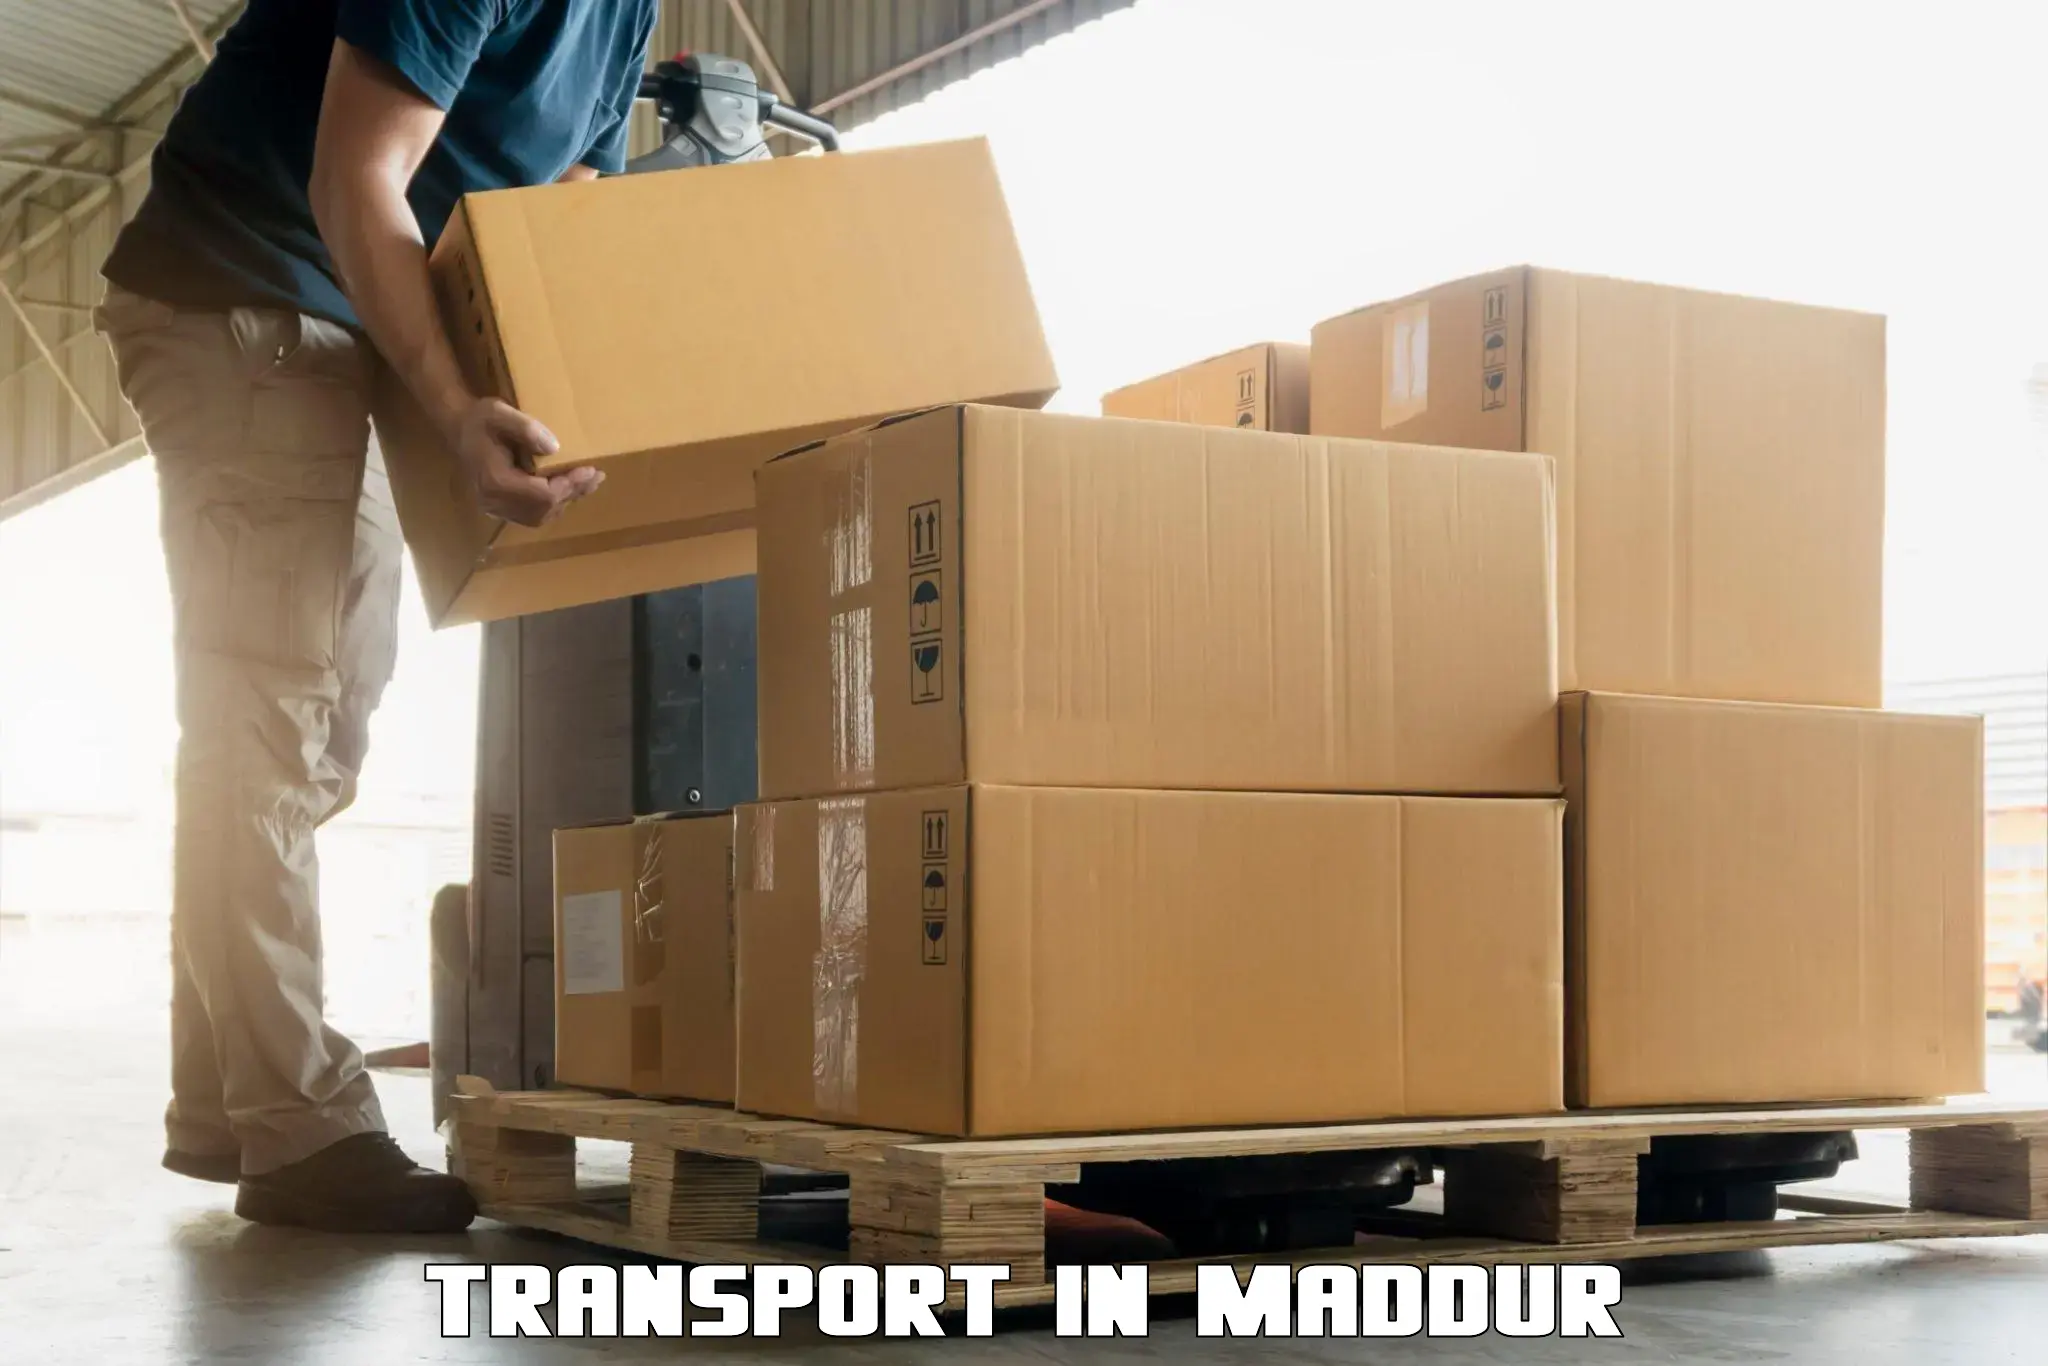 Express transport services in Maddur